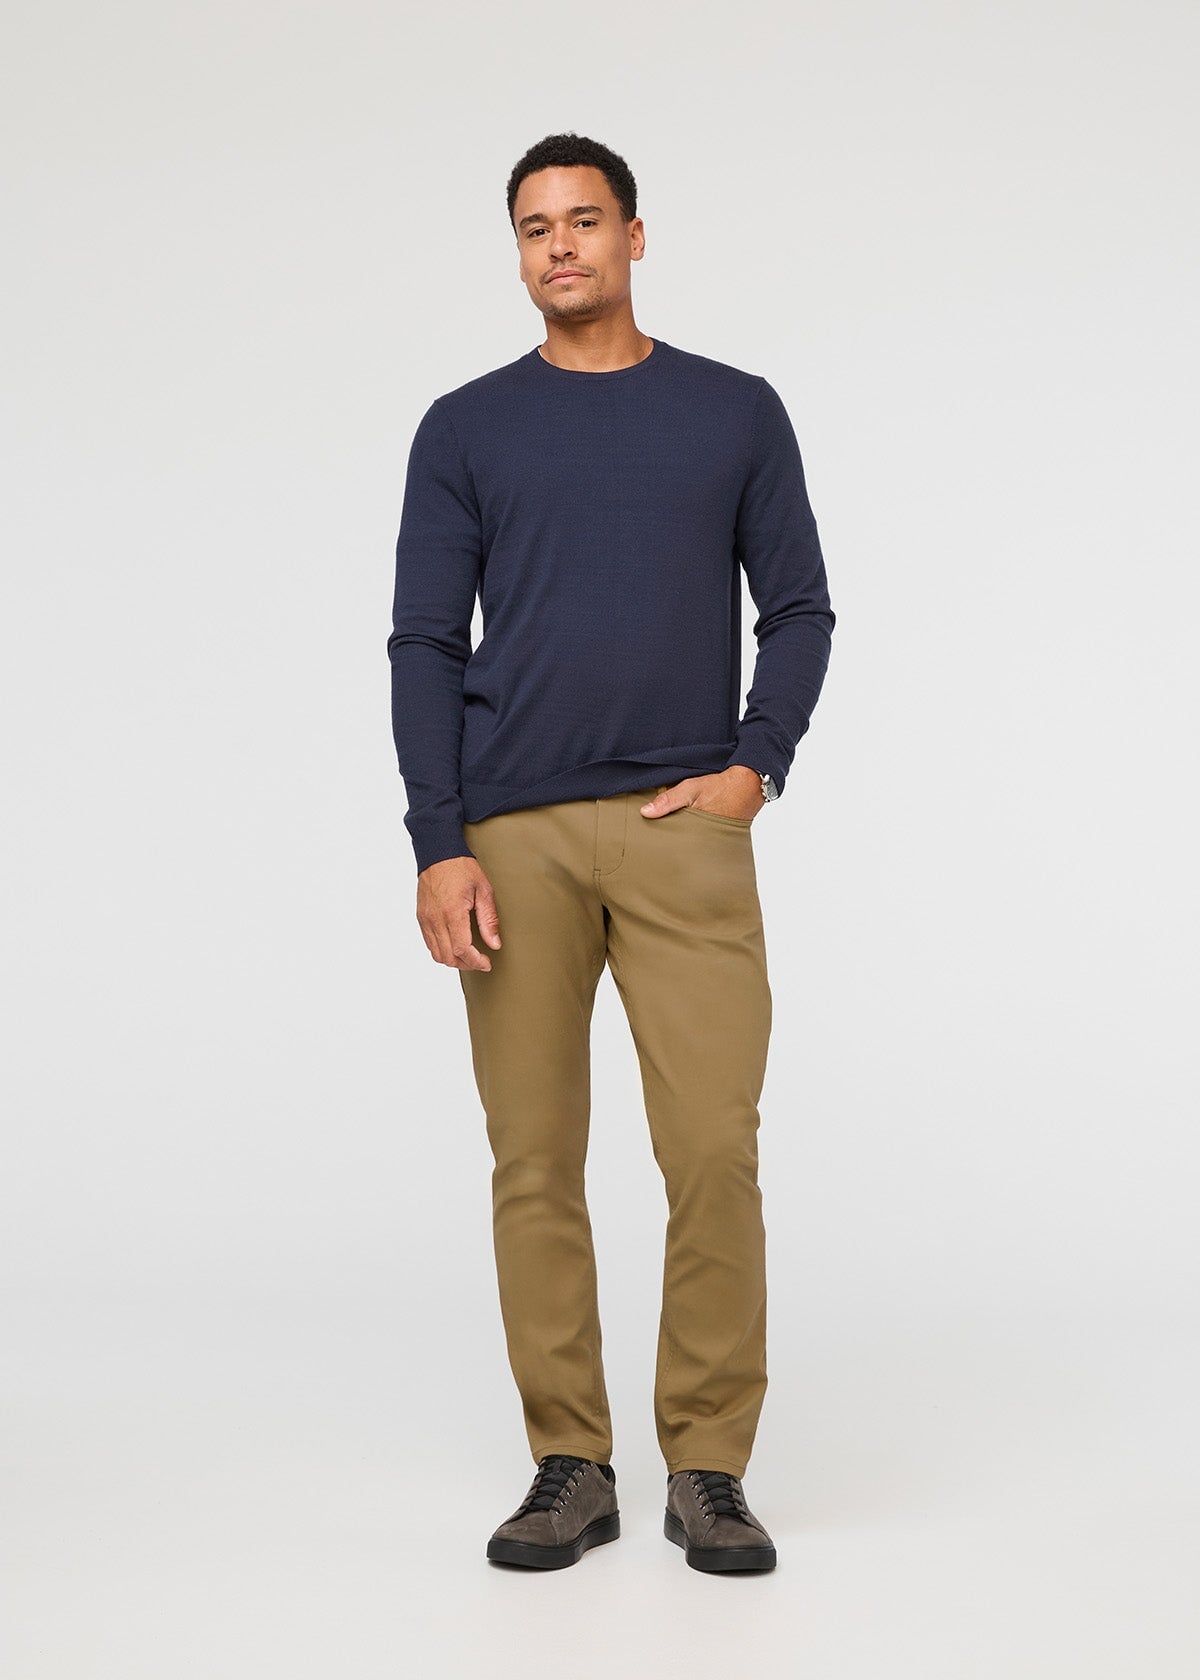 mens khaki relaxed fit stretch pant full body